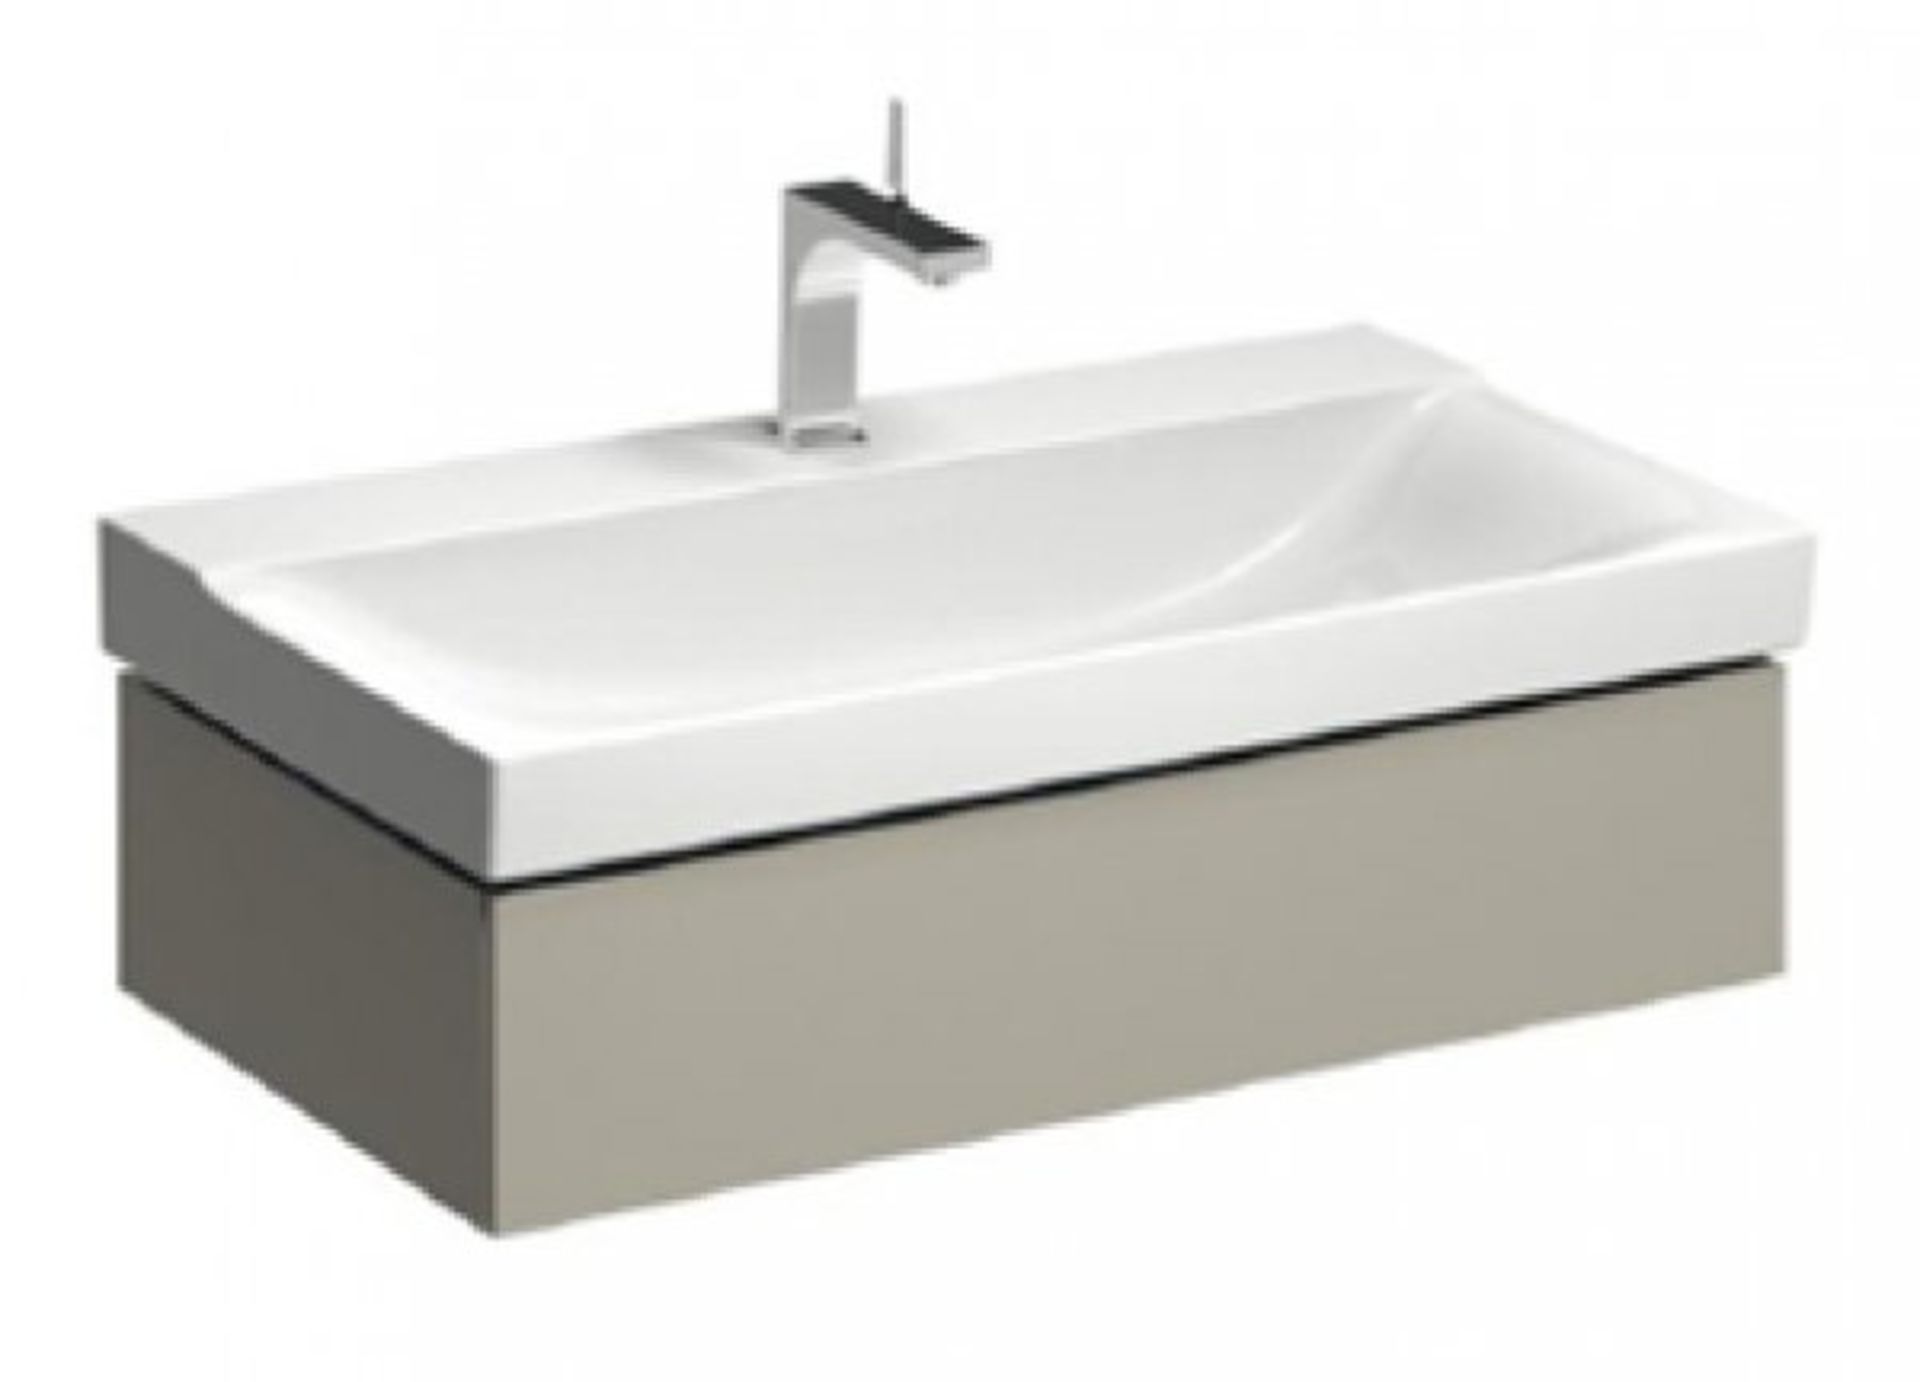 (XL30) 880mm Keramag Xeno 2 Vanity unit. RRP £1,075.99. Comes complete with basin. Keramag Xe... - Image 2 of 3